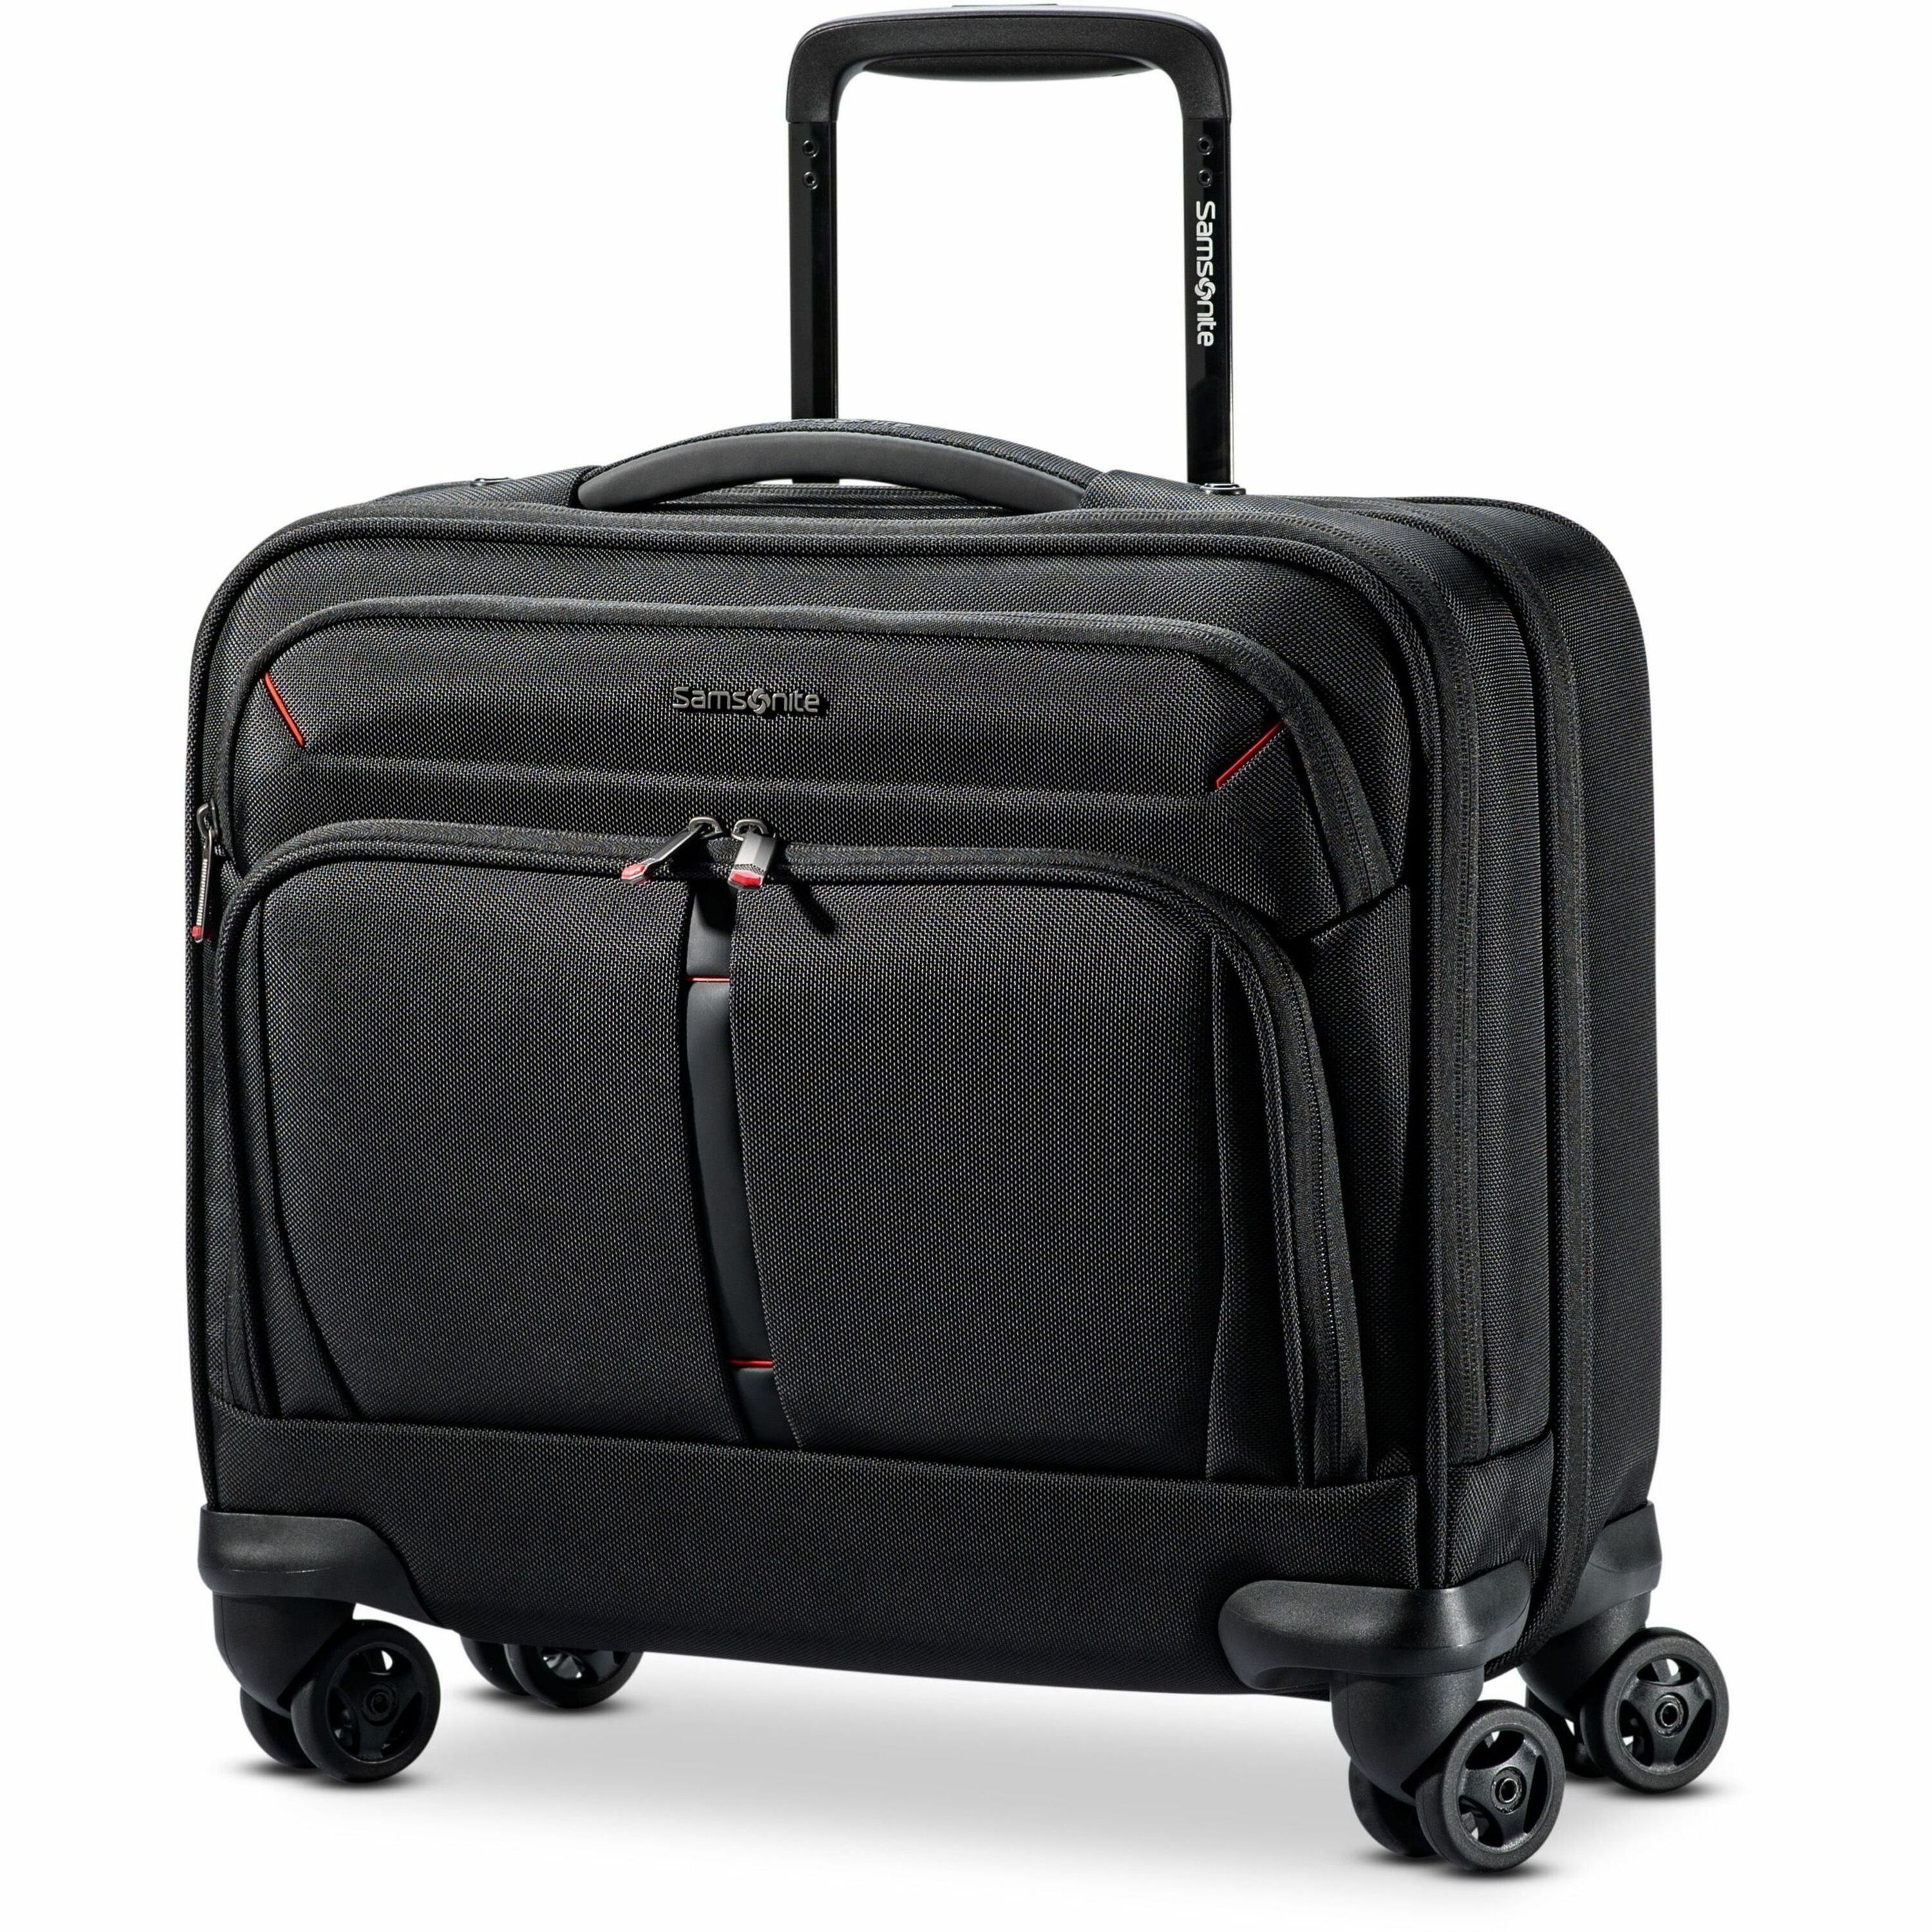 samsonite-xenon-30-travel-luggage-case-for-129-to-156-notebook-tablet-accessories-black-1680d-ballistic-polyester-body-tricot-interior-material-trolley-strap-handle-1-each_sml1473331041 - 1